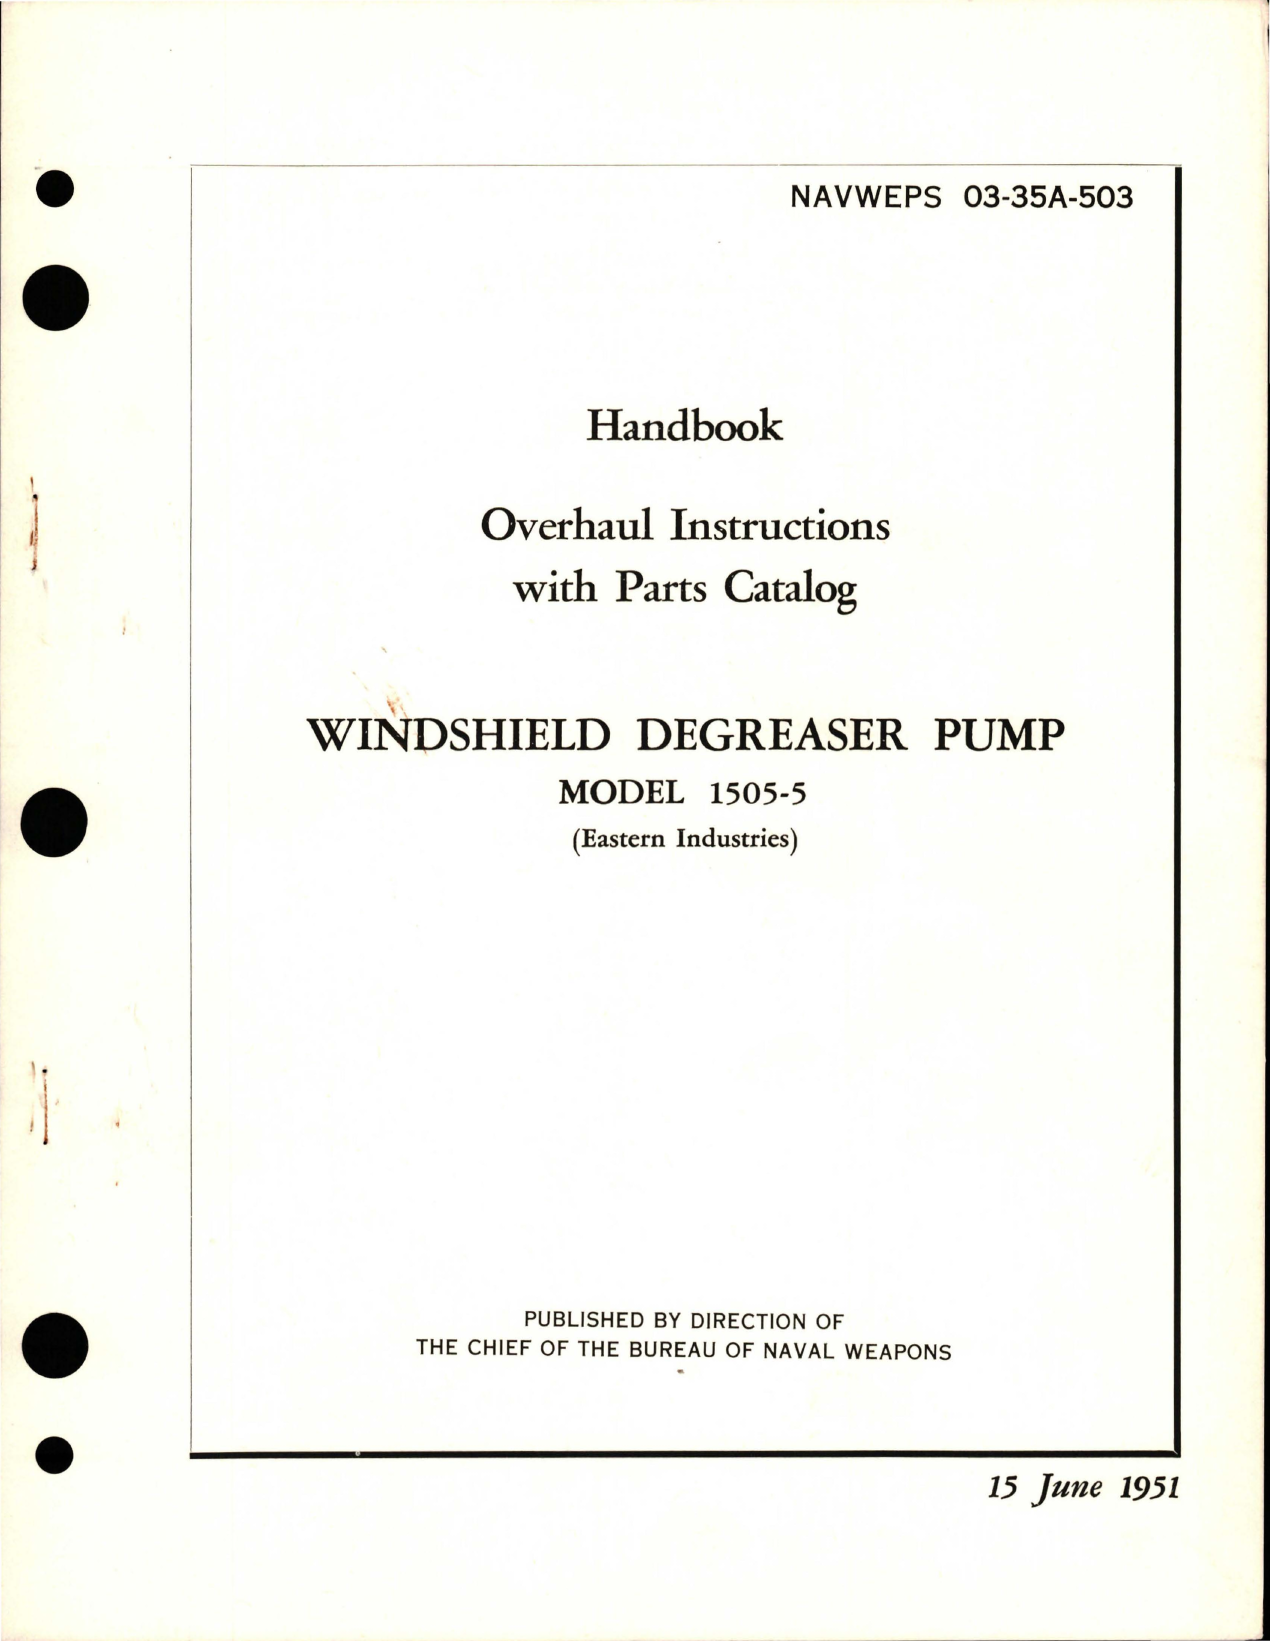 Sample page 1 from AirCorps Library document: Overhaul Instructions with Parts Catalog for Windshield Degreaser Pump - Model 1505-5